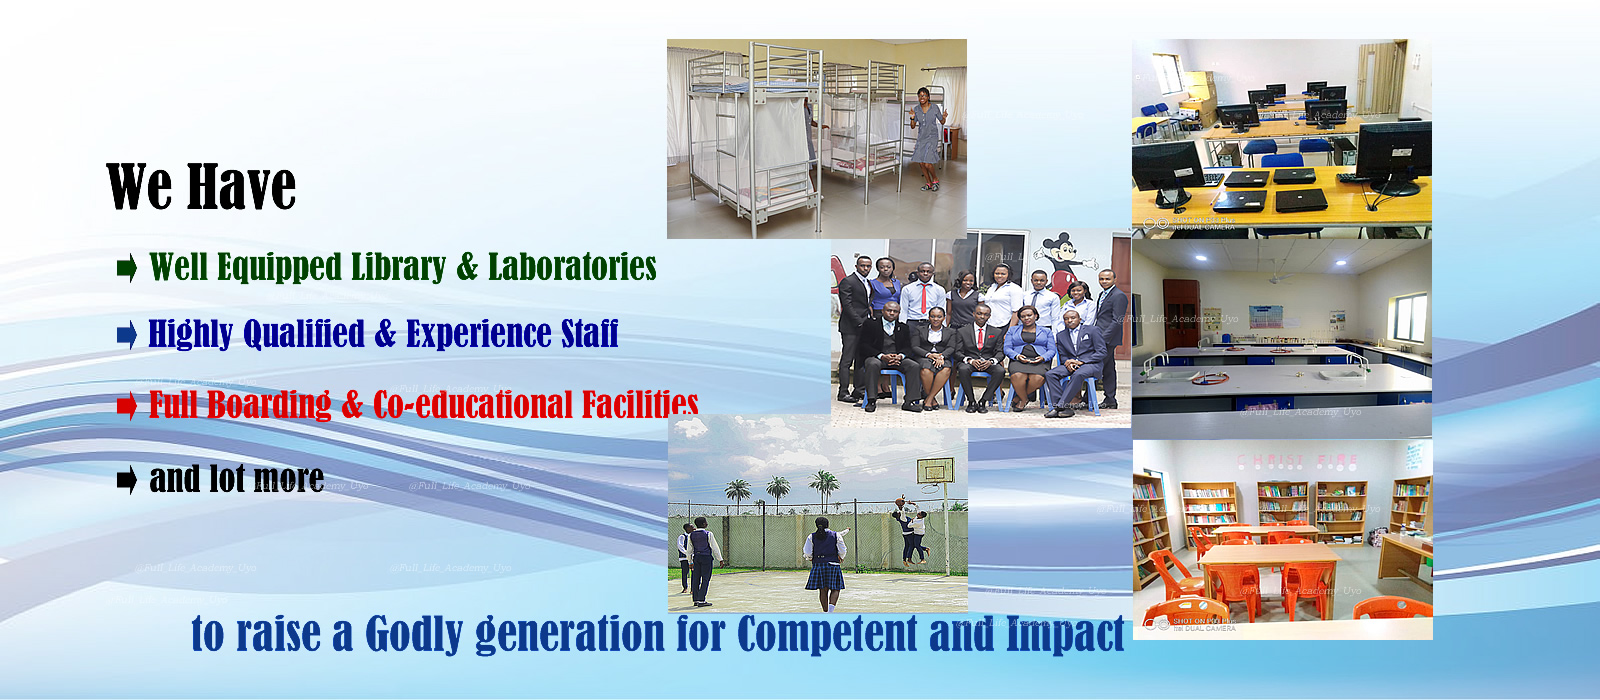 our facilities